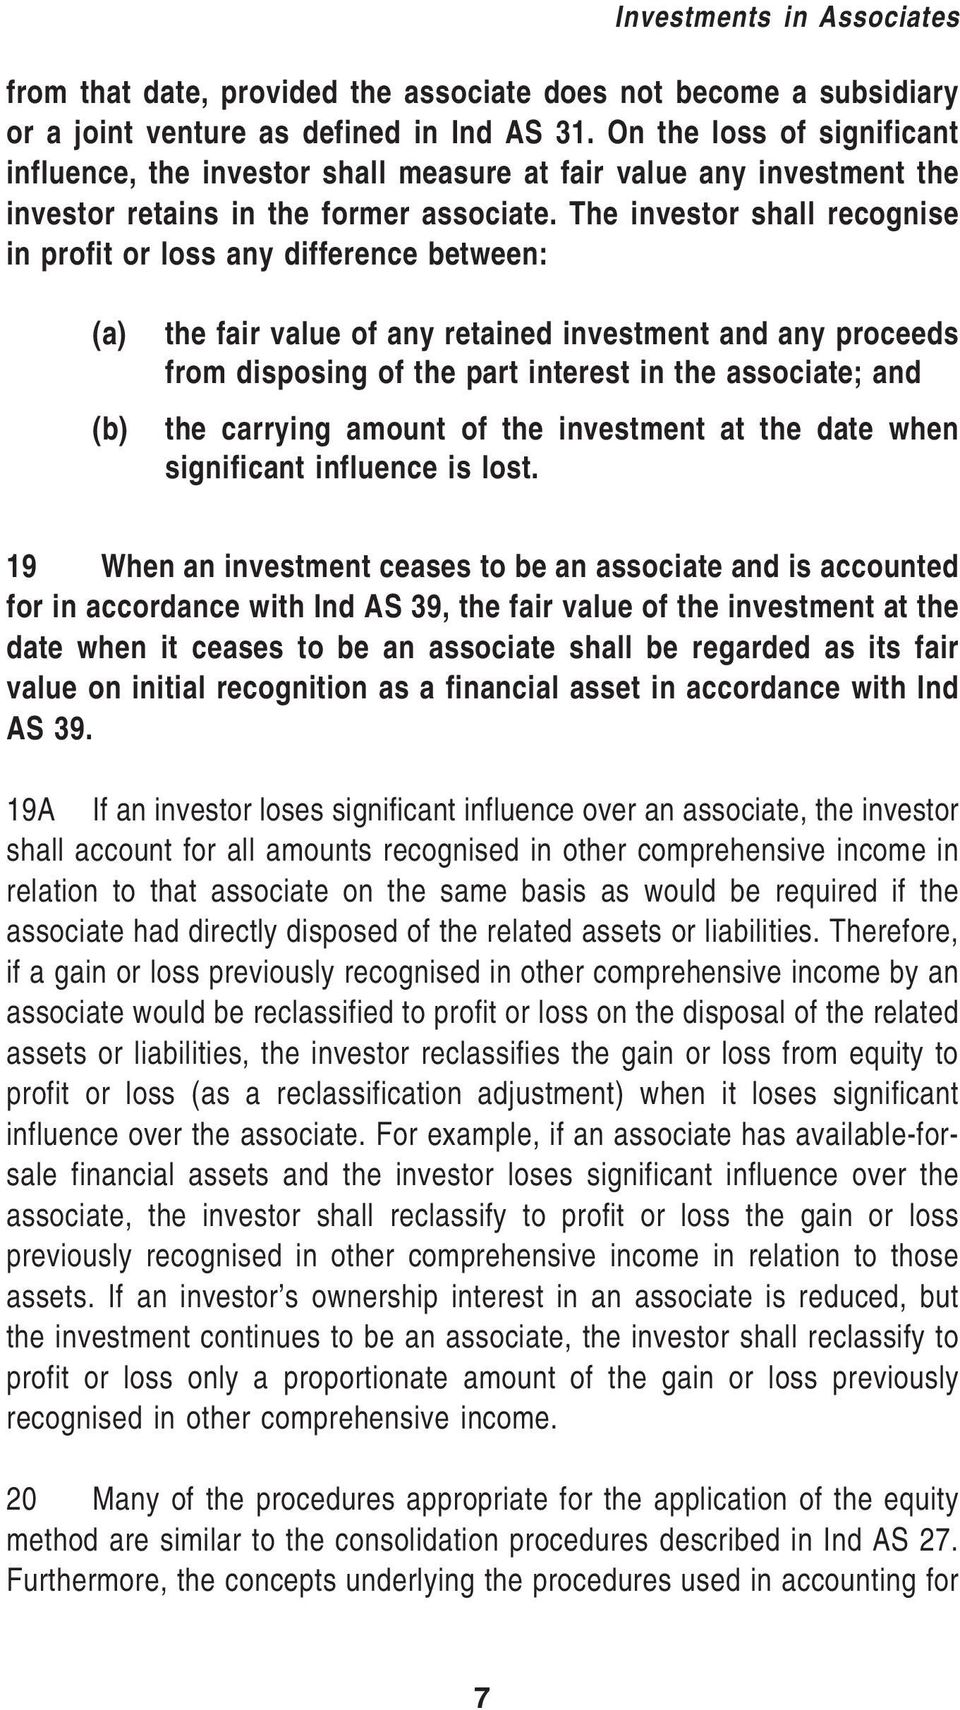 The investor shall recognise in profit or loss any difference between: (a) (b) the fair value of any retained investment and any proceeds from disposing of the part interest in the associate; and the